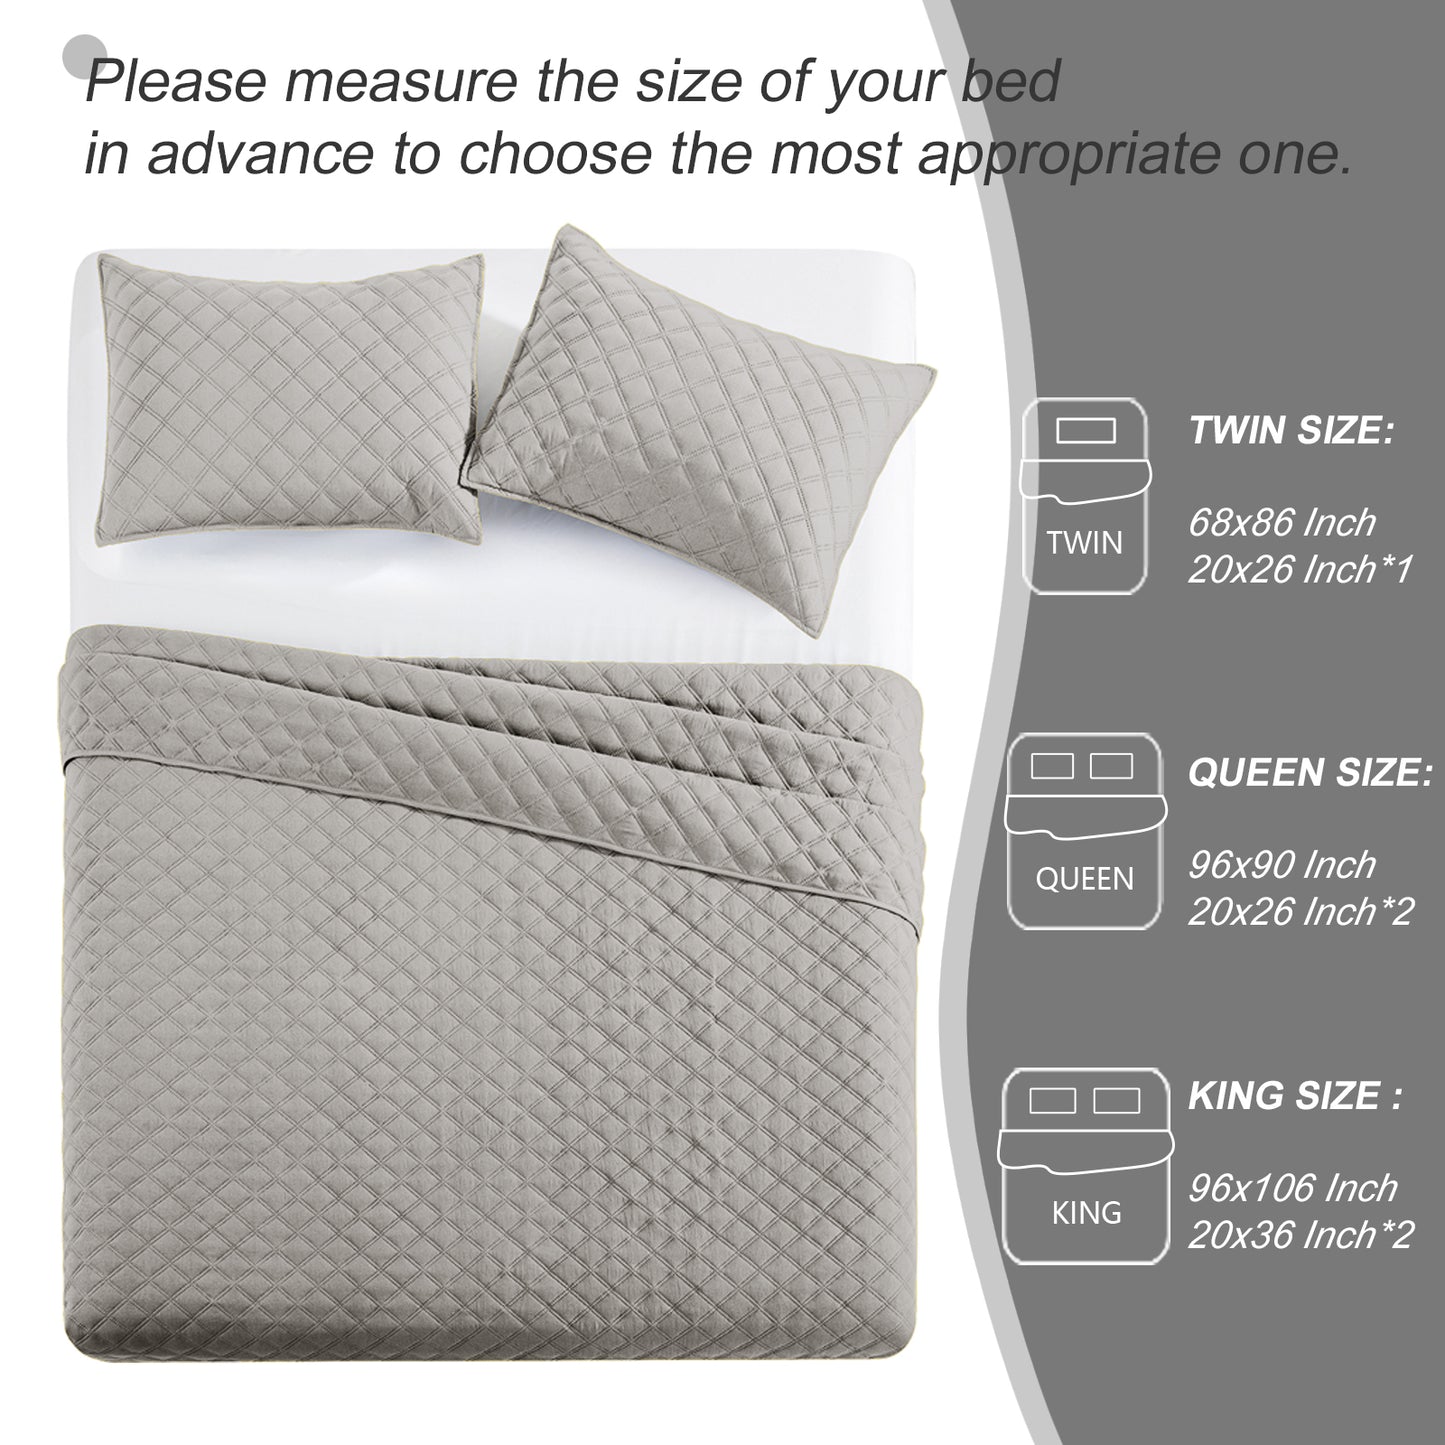 Exclusivo Mezcla 2-Piece Light Gray Twin Size Quilt Set, Box Pattern Ultrasonic Lightweight and Soft Quilts/Bedspreads/Coverlets/Bedding Set (1 Quilt, 1 Pillow Sham) for All Seasons